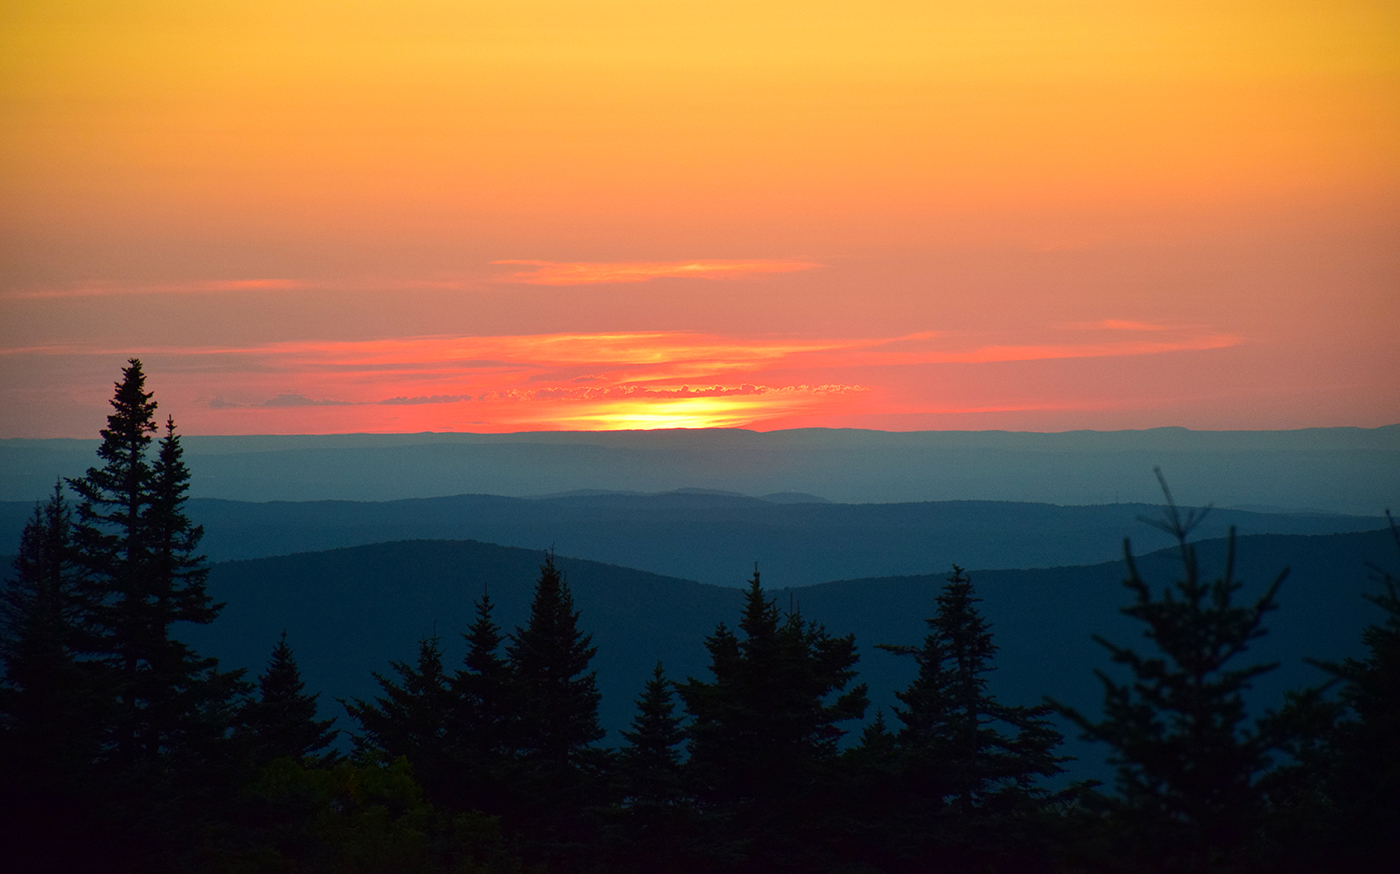 View From Mt. Greylock Photo By Todd Van Hoosear Via Flickr Commons